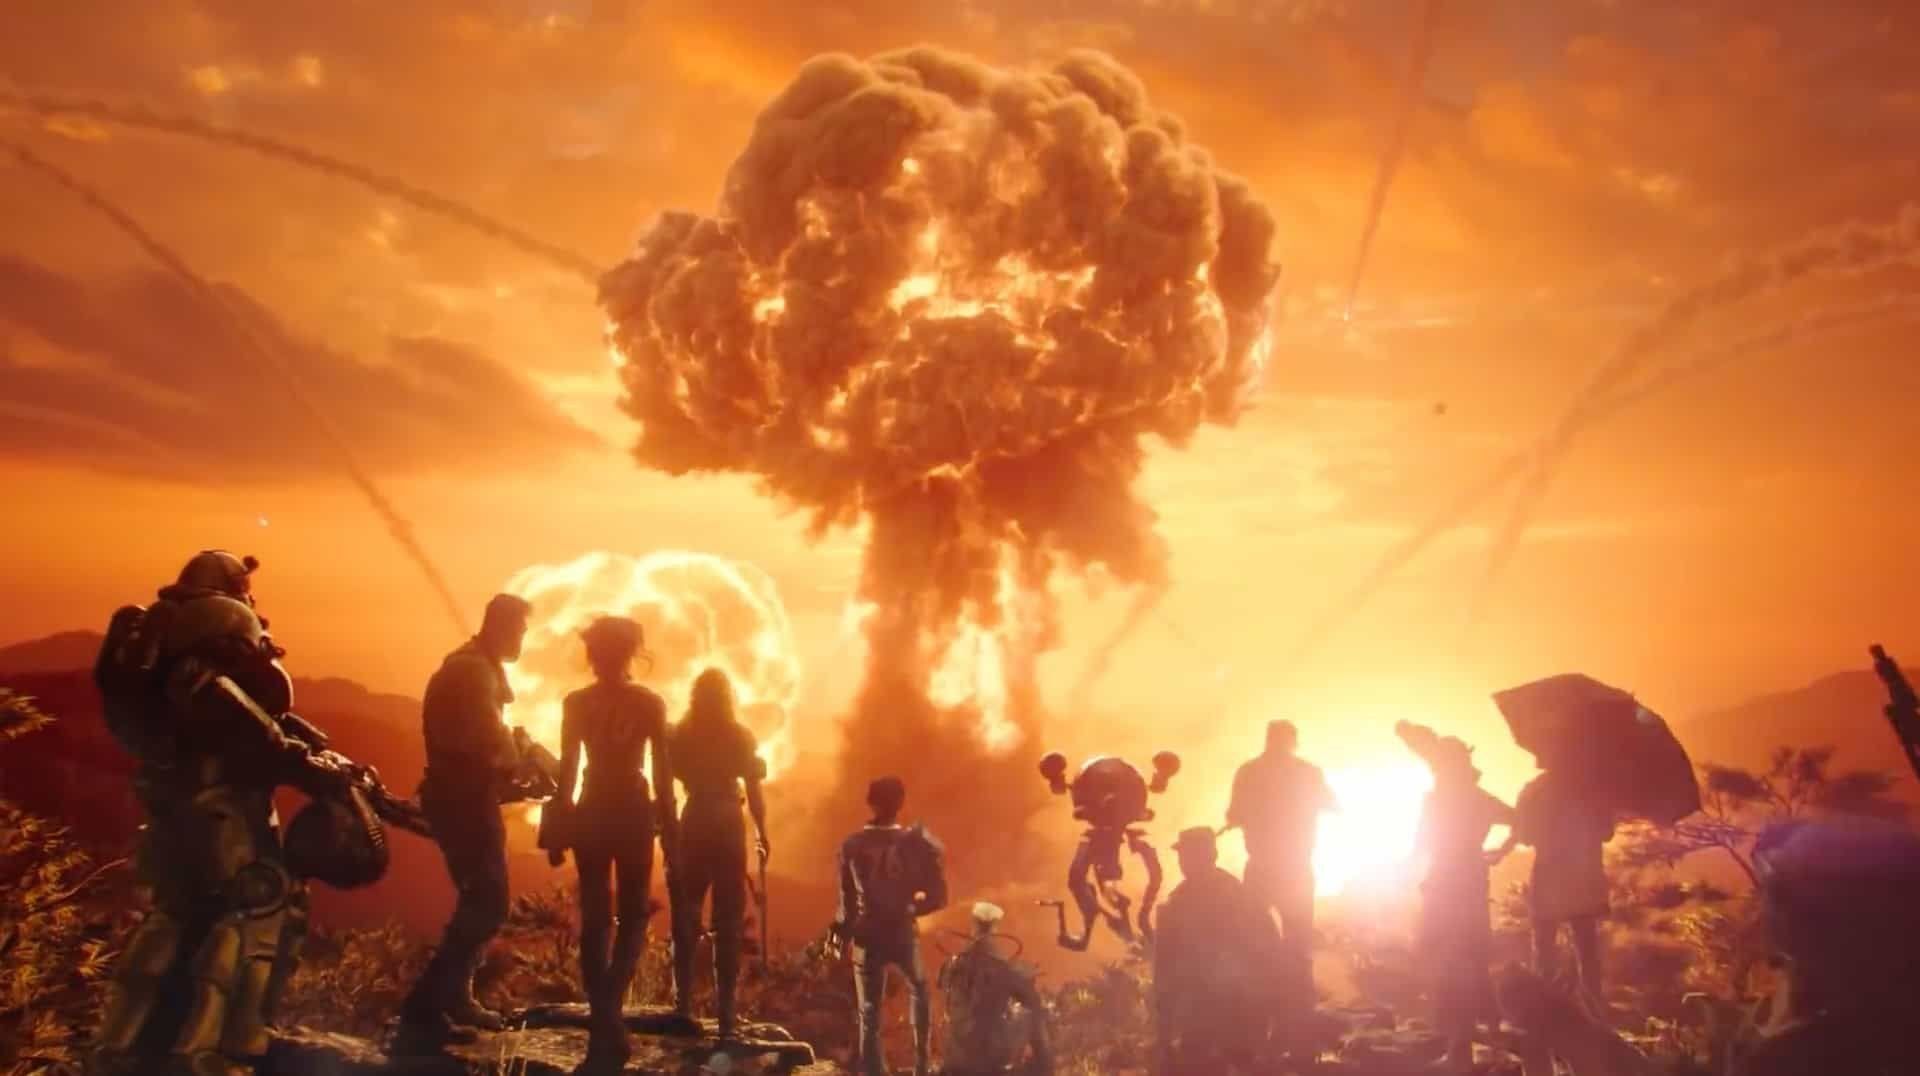 Fallout 76 PS4 Update 1.49 Arrives With Stash Increase, Heart Wrencher Skin, And Game Fixes - PlayStation Universe